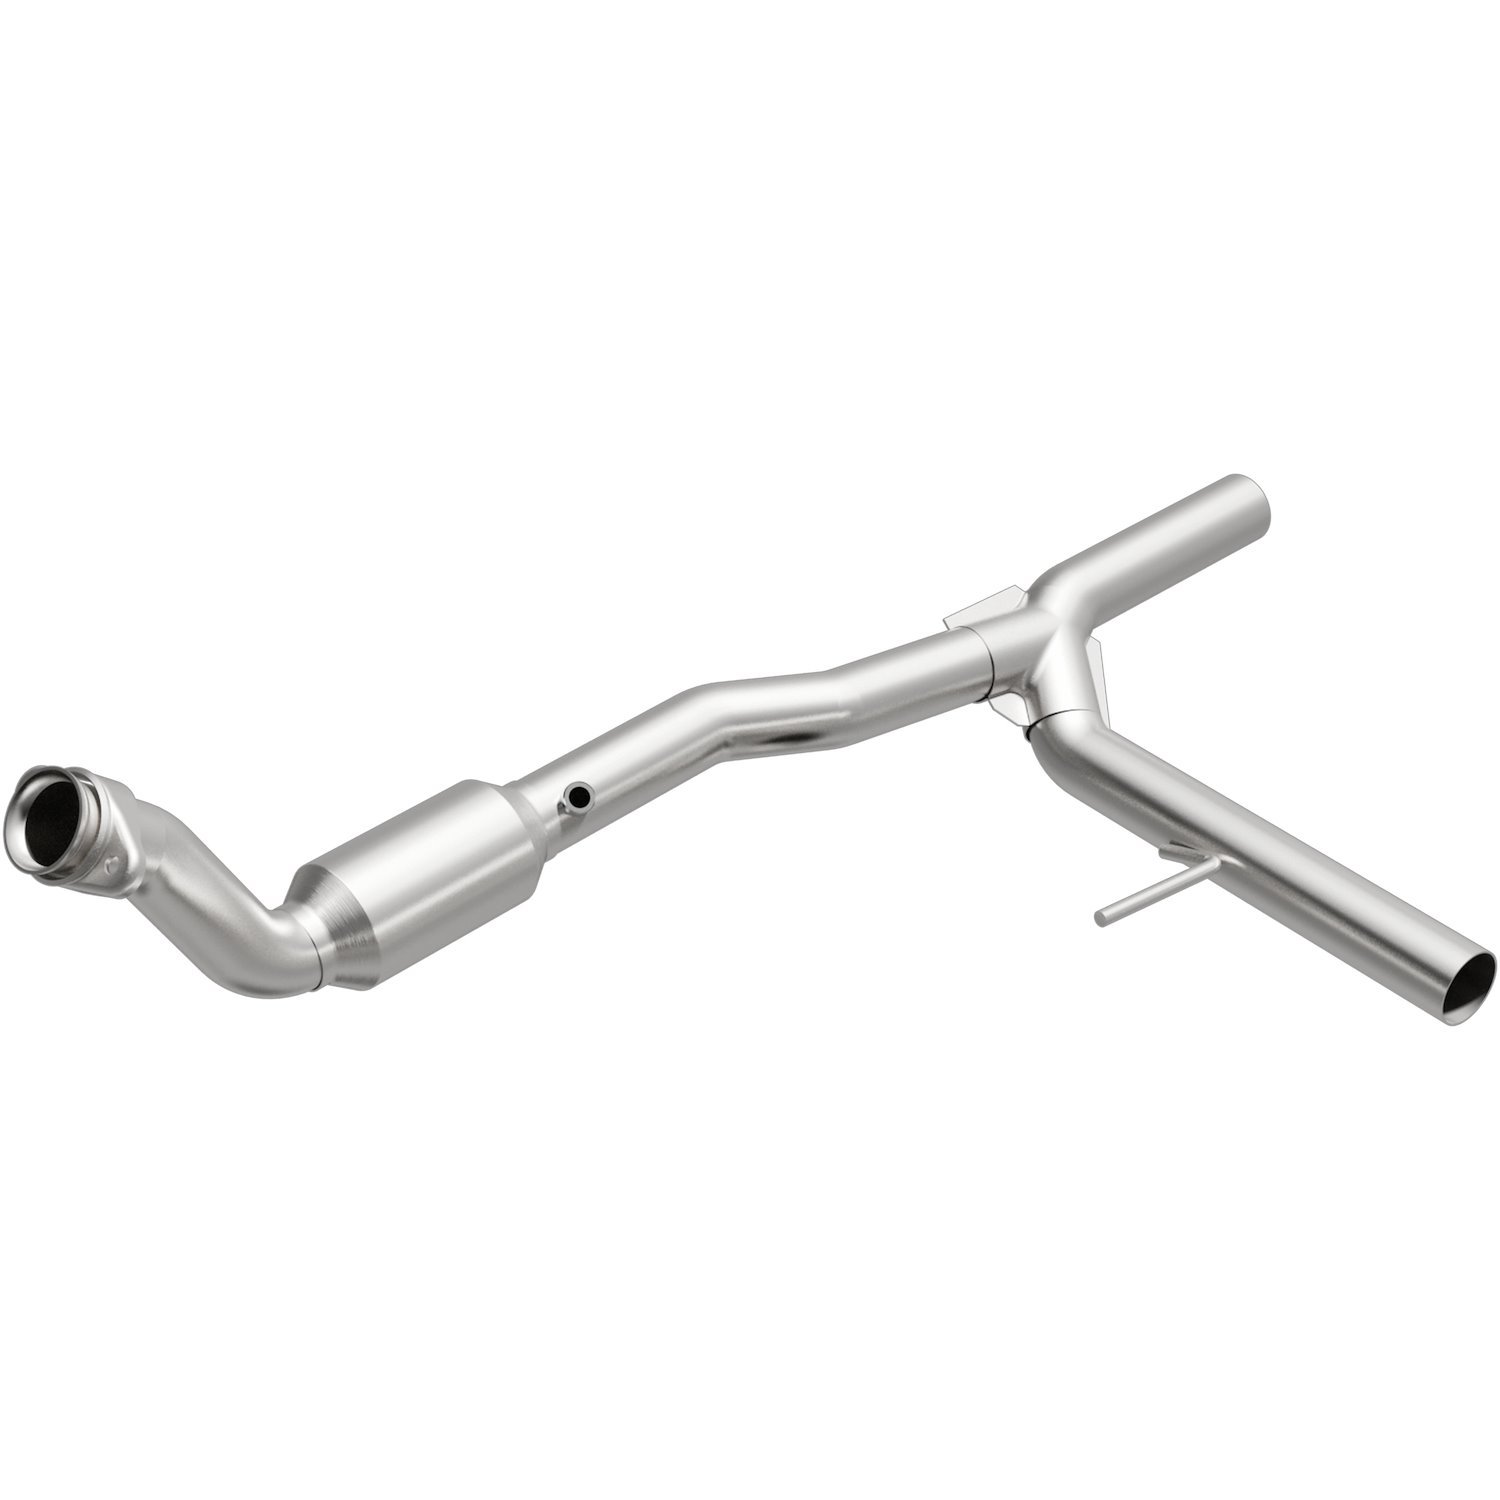 2005-2008 Ford F-150 OEM Grade Federal / EPA Compliant Direct-Fit Catalytic Converter